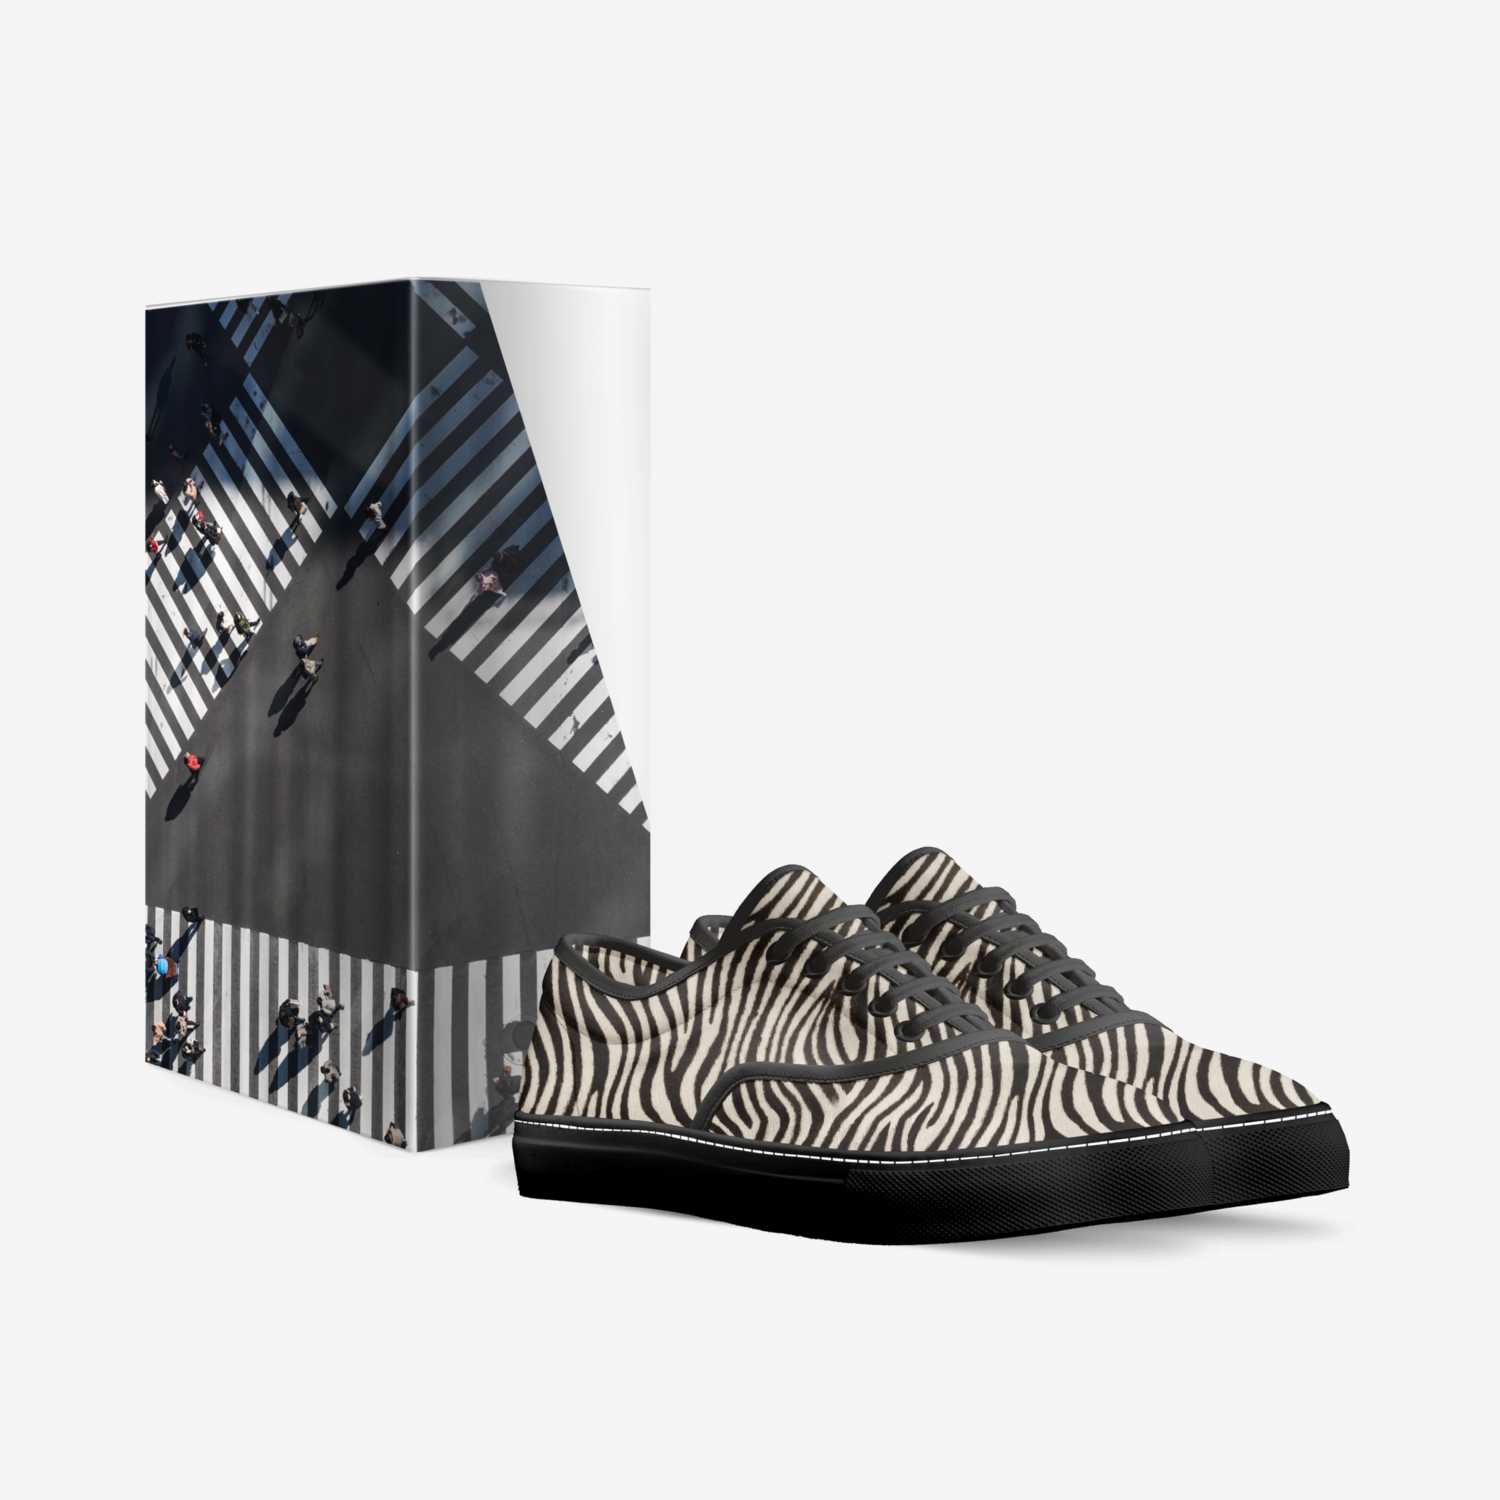 ZEBRAZ custom made in Italy shoes by M. B. Meyer | Box view